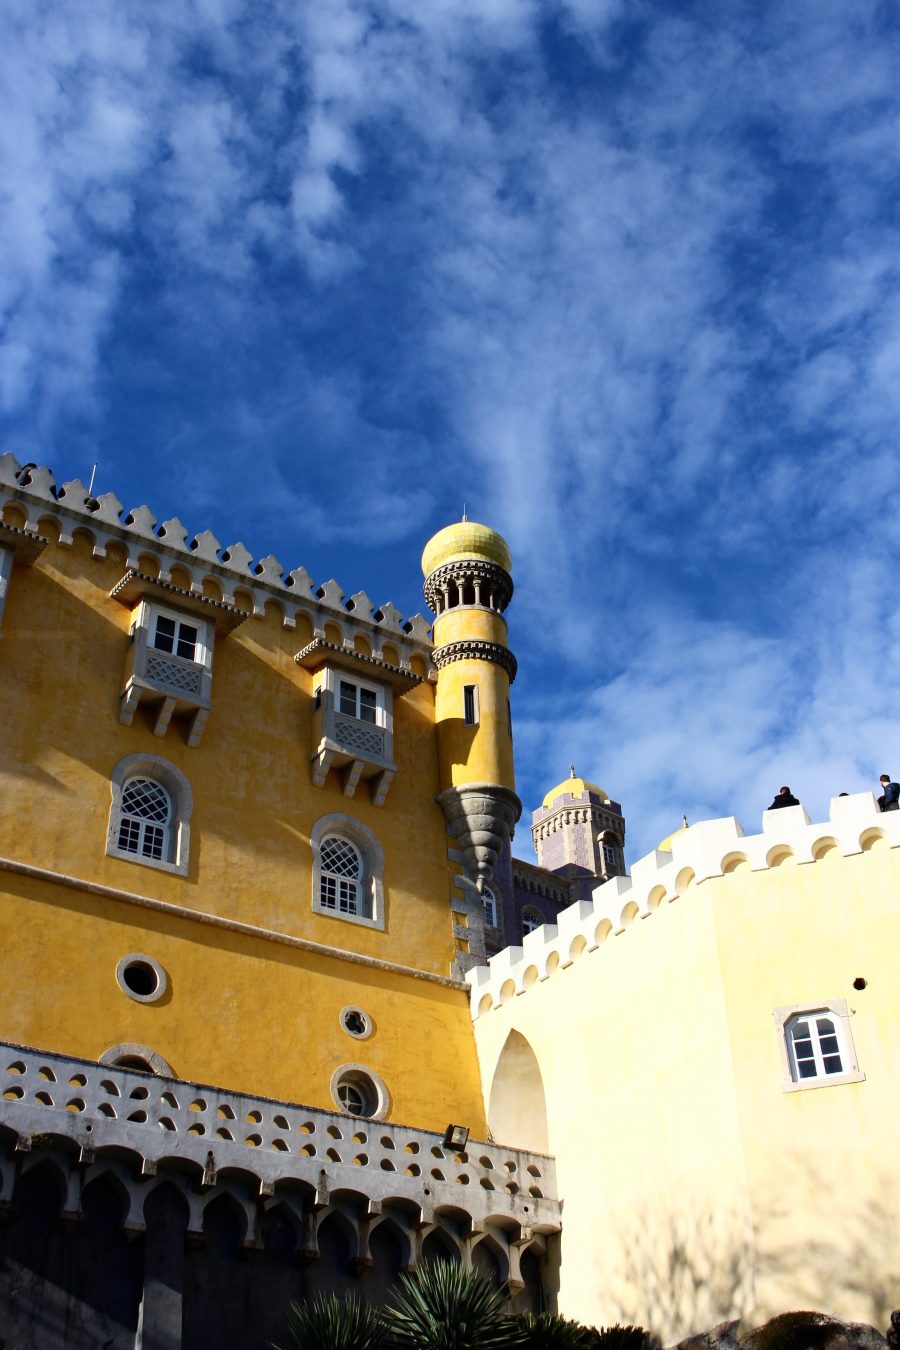 Fairytale in Portugal - Pena Palace and Moors Castle